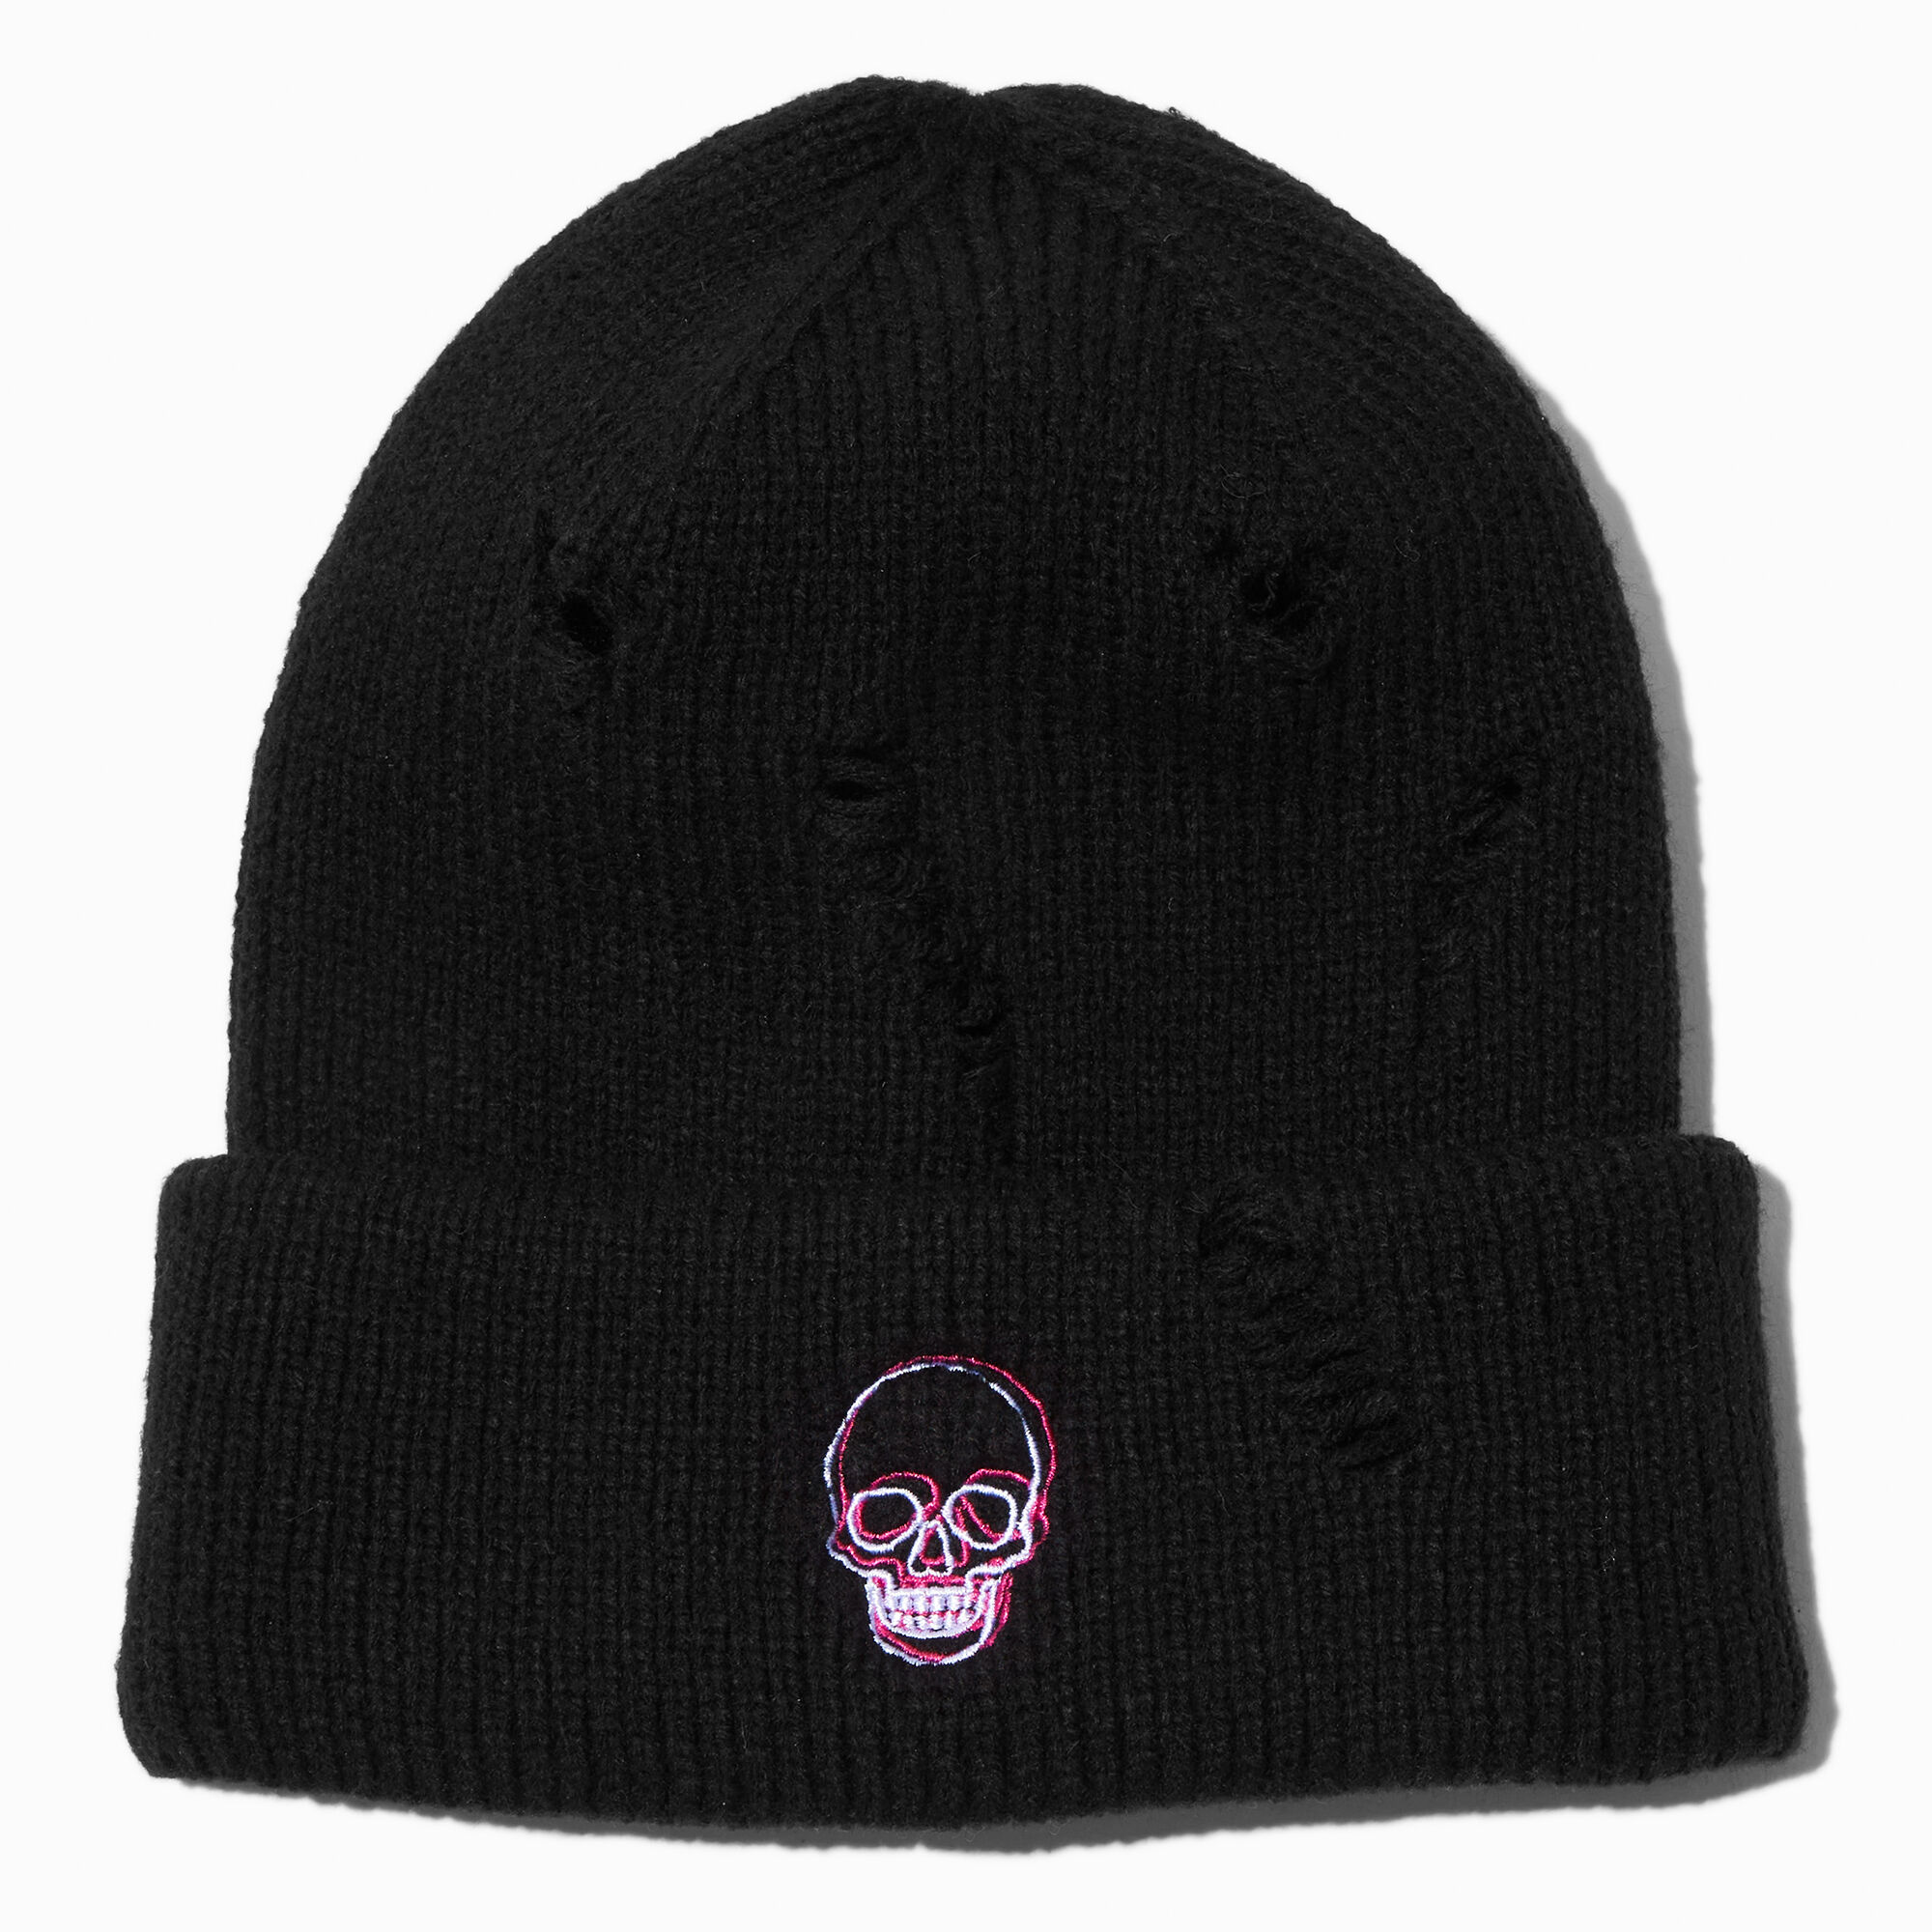 View Claires Embroidered Skull Beanie Hat Black information